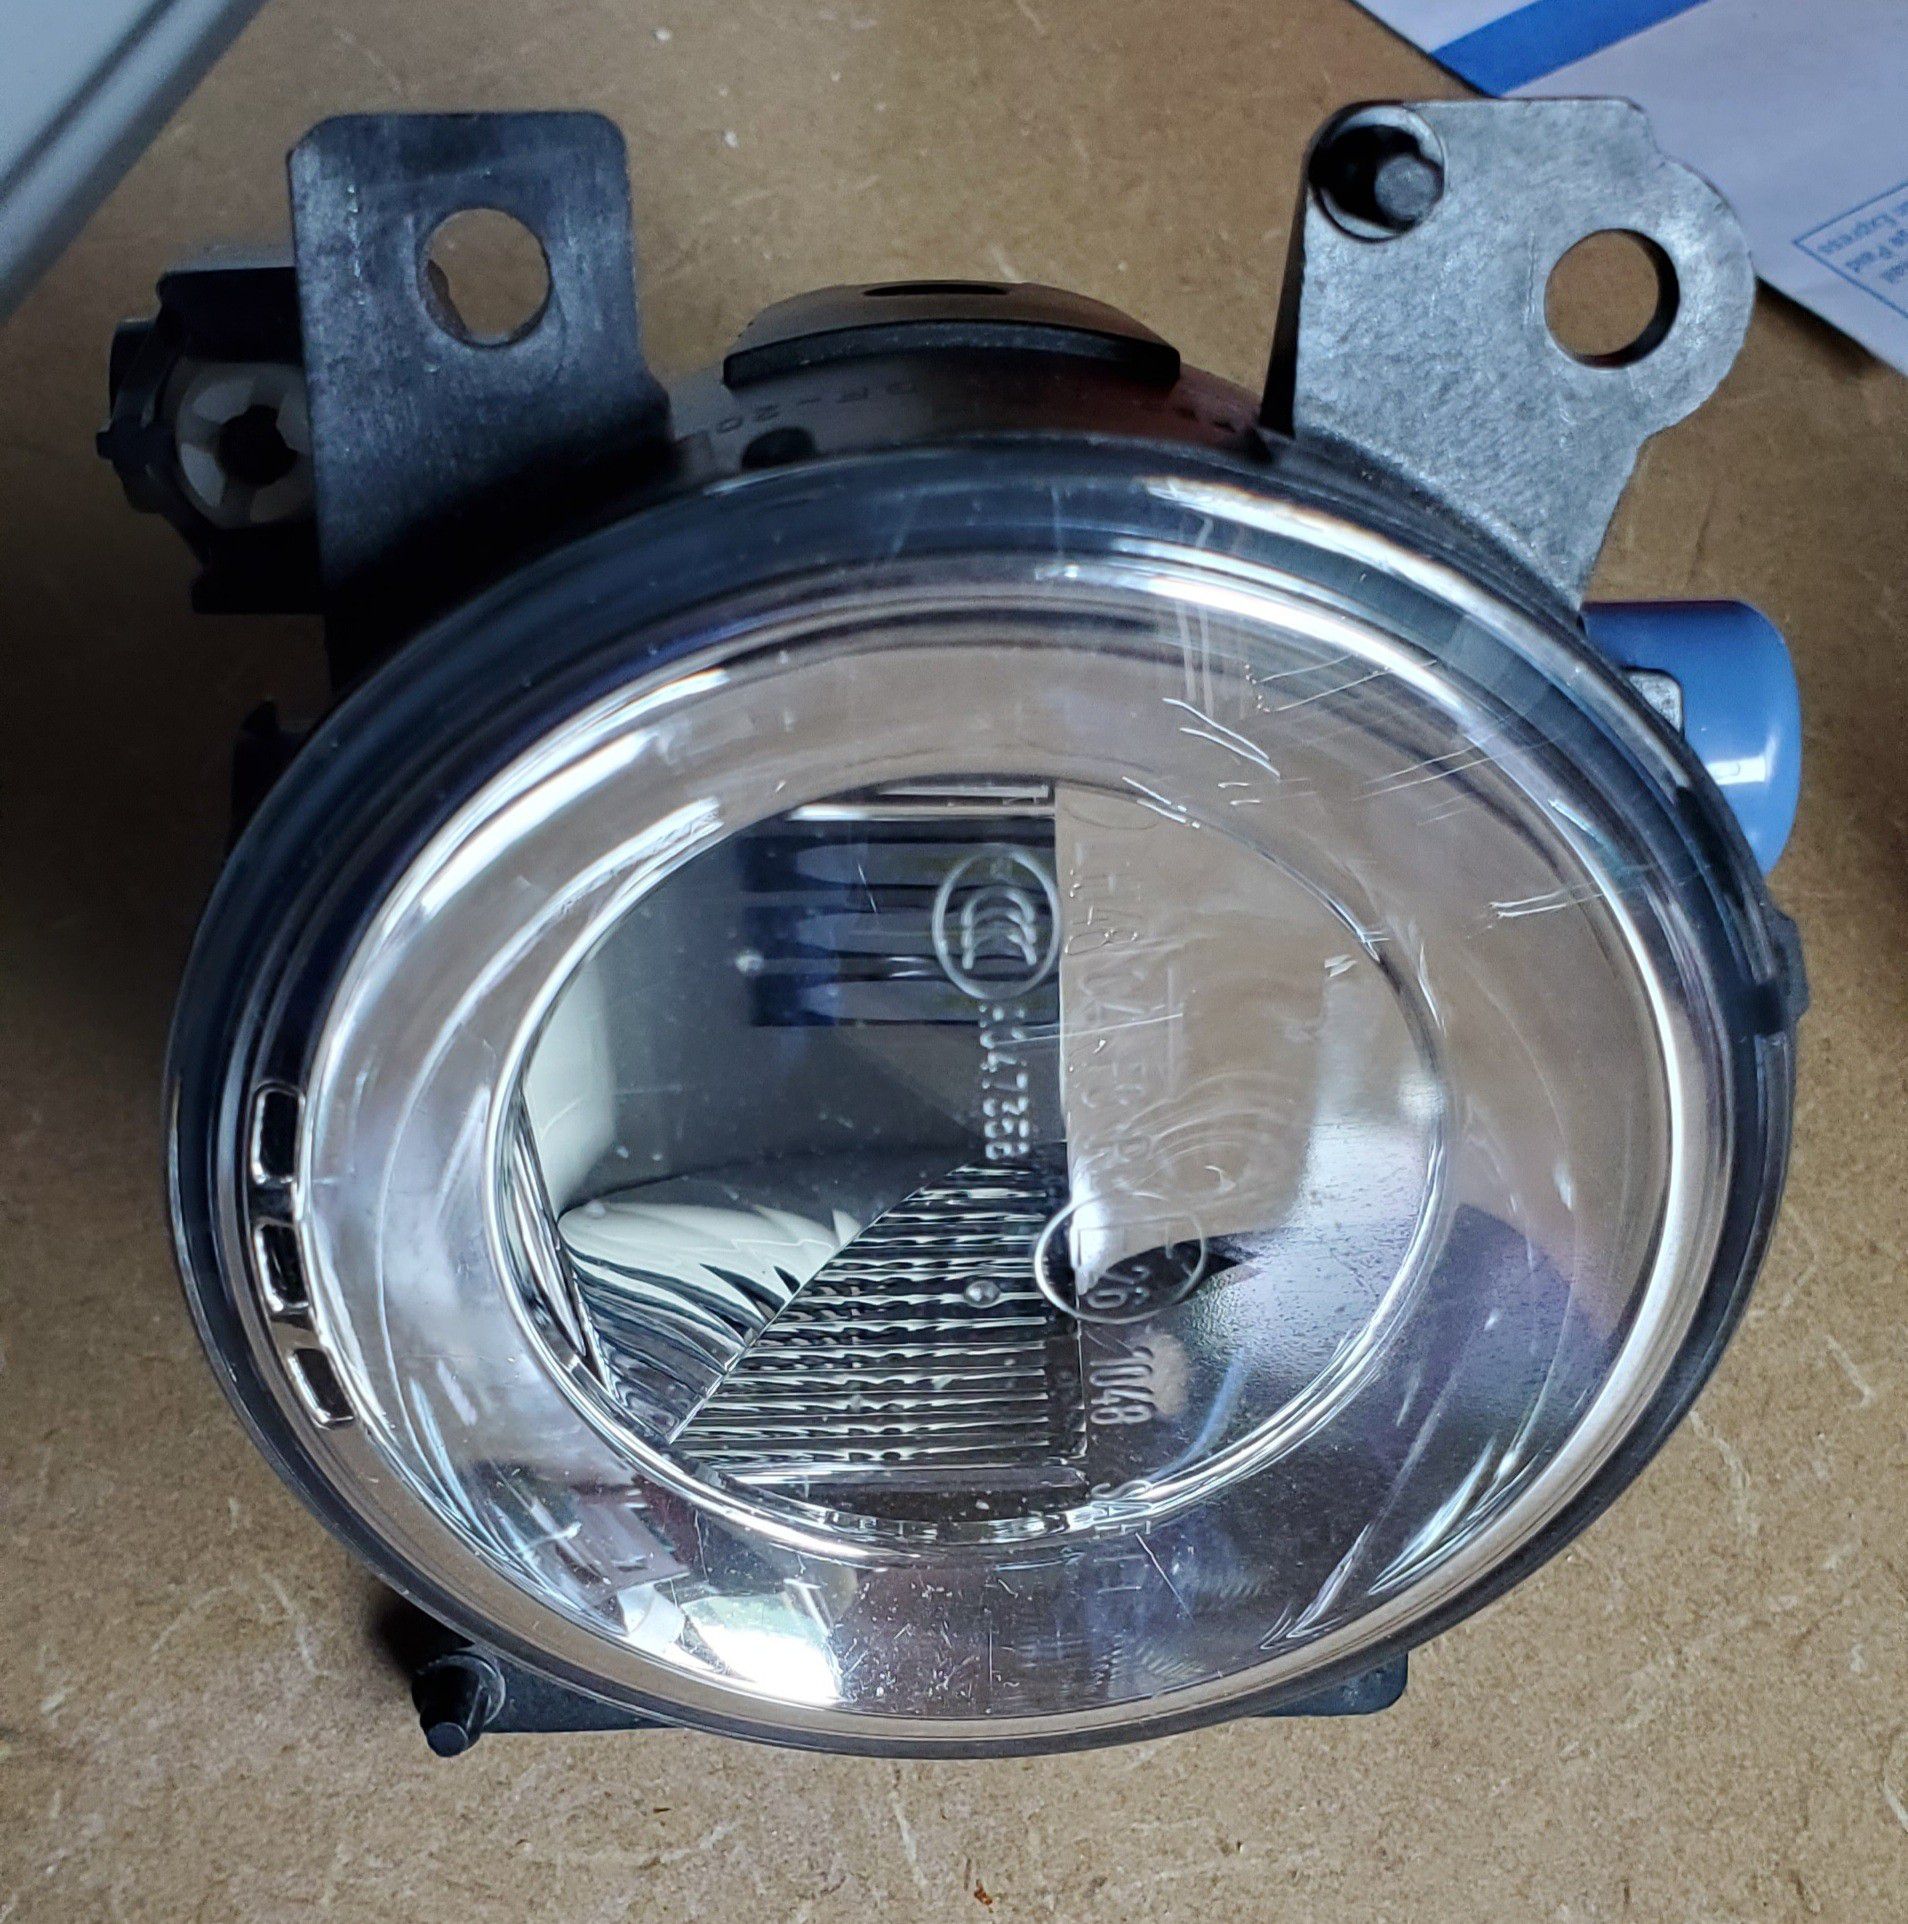 LH fog light for Infinti QX80. Tested and works